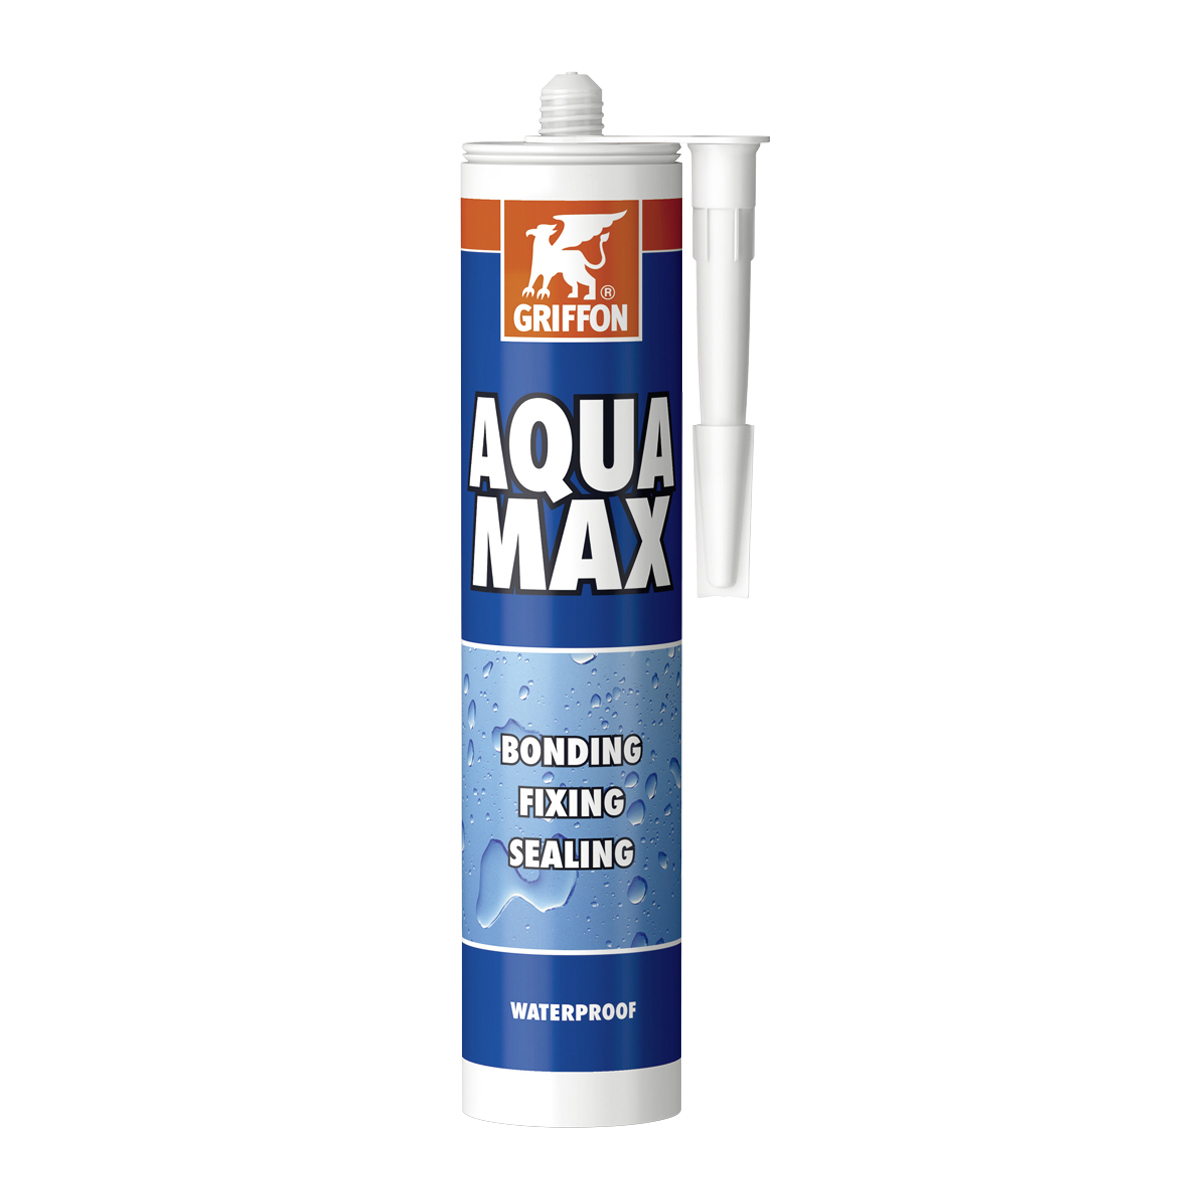 Aqua Max, water-resistant, solvent-free assembly adhesive and sealant based on SMP-Polymer, Cartridge 425 g, white Aqua Max, water-resistant, solvent-free assembly adhesive and sealant based on SMP-Polymer, Cartridge 425 g, white